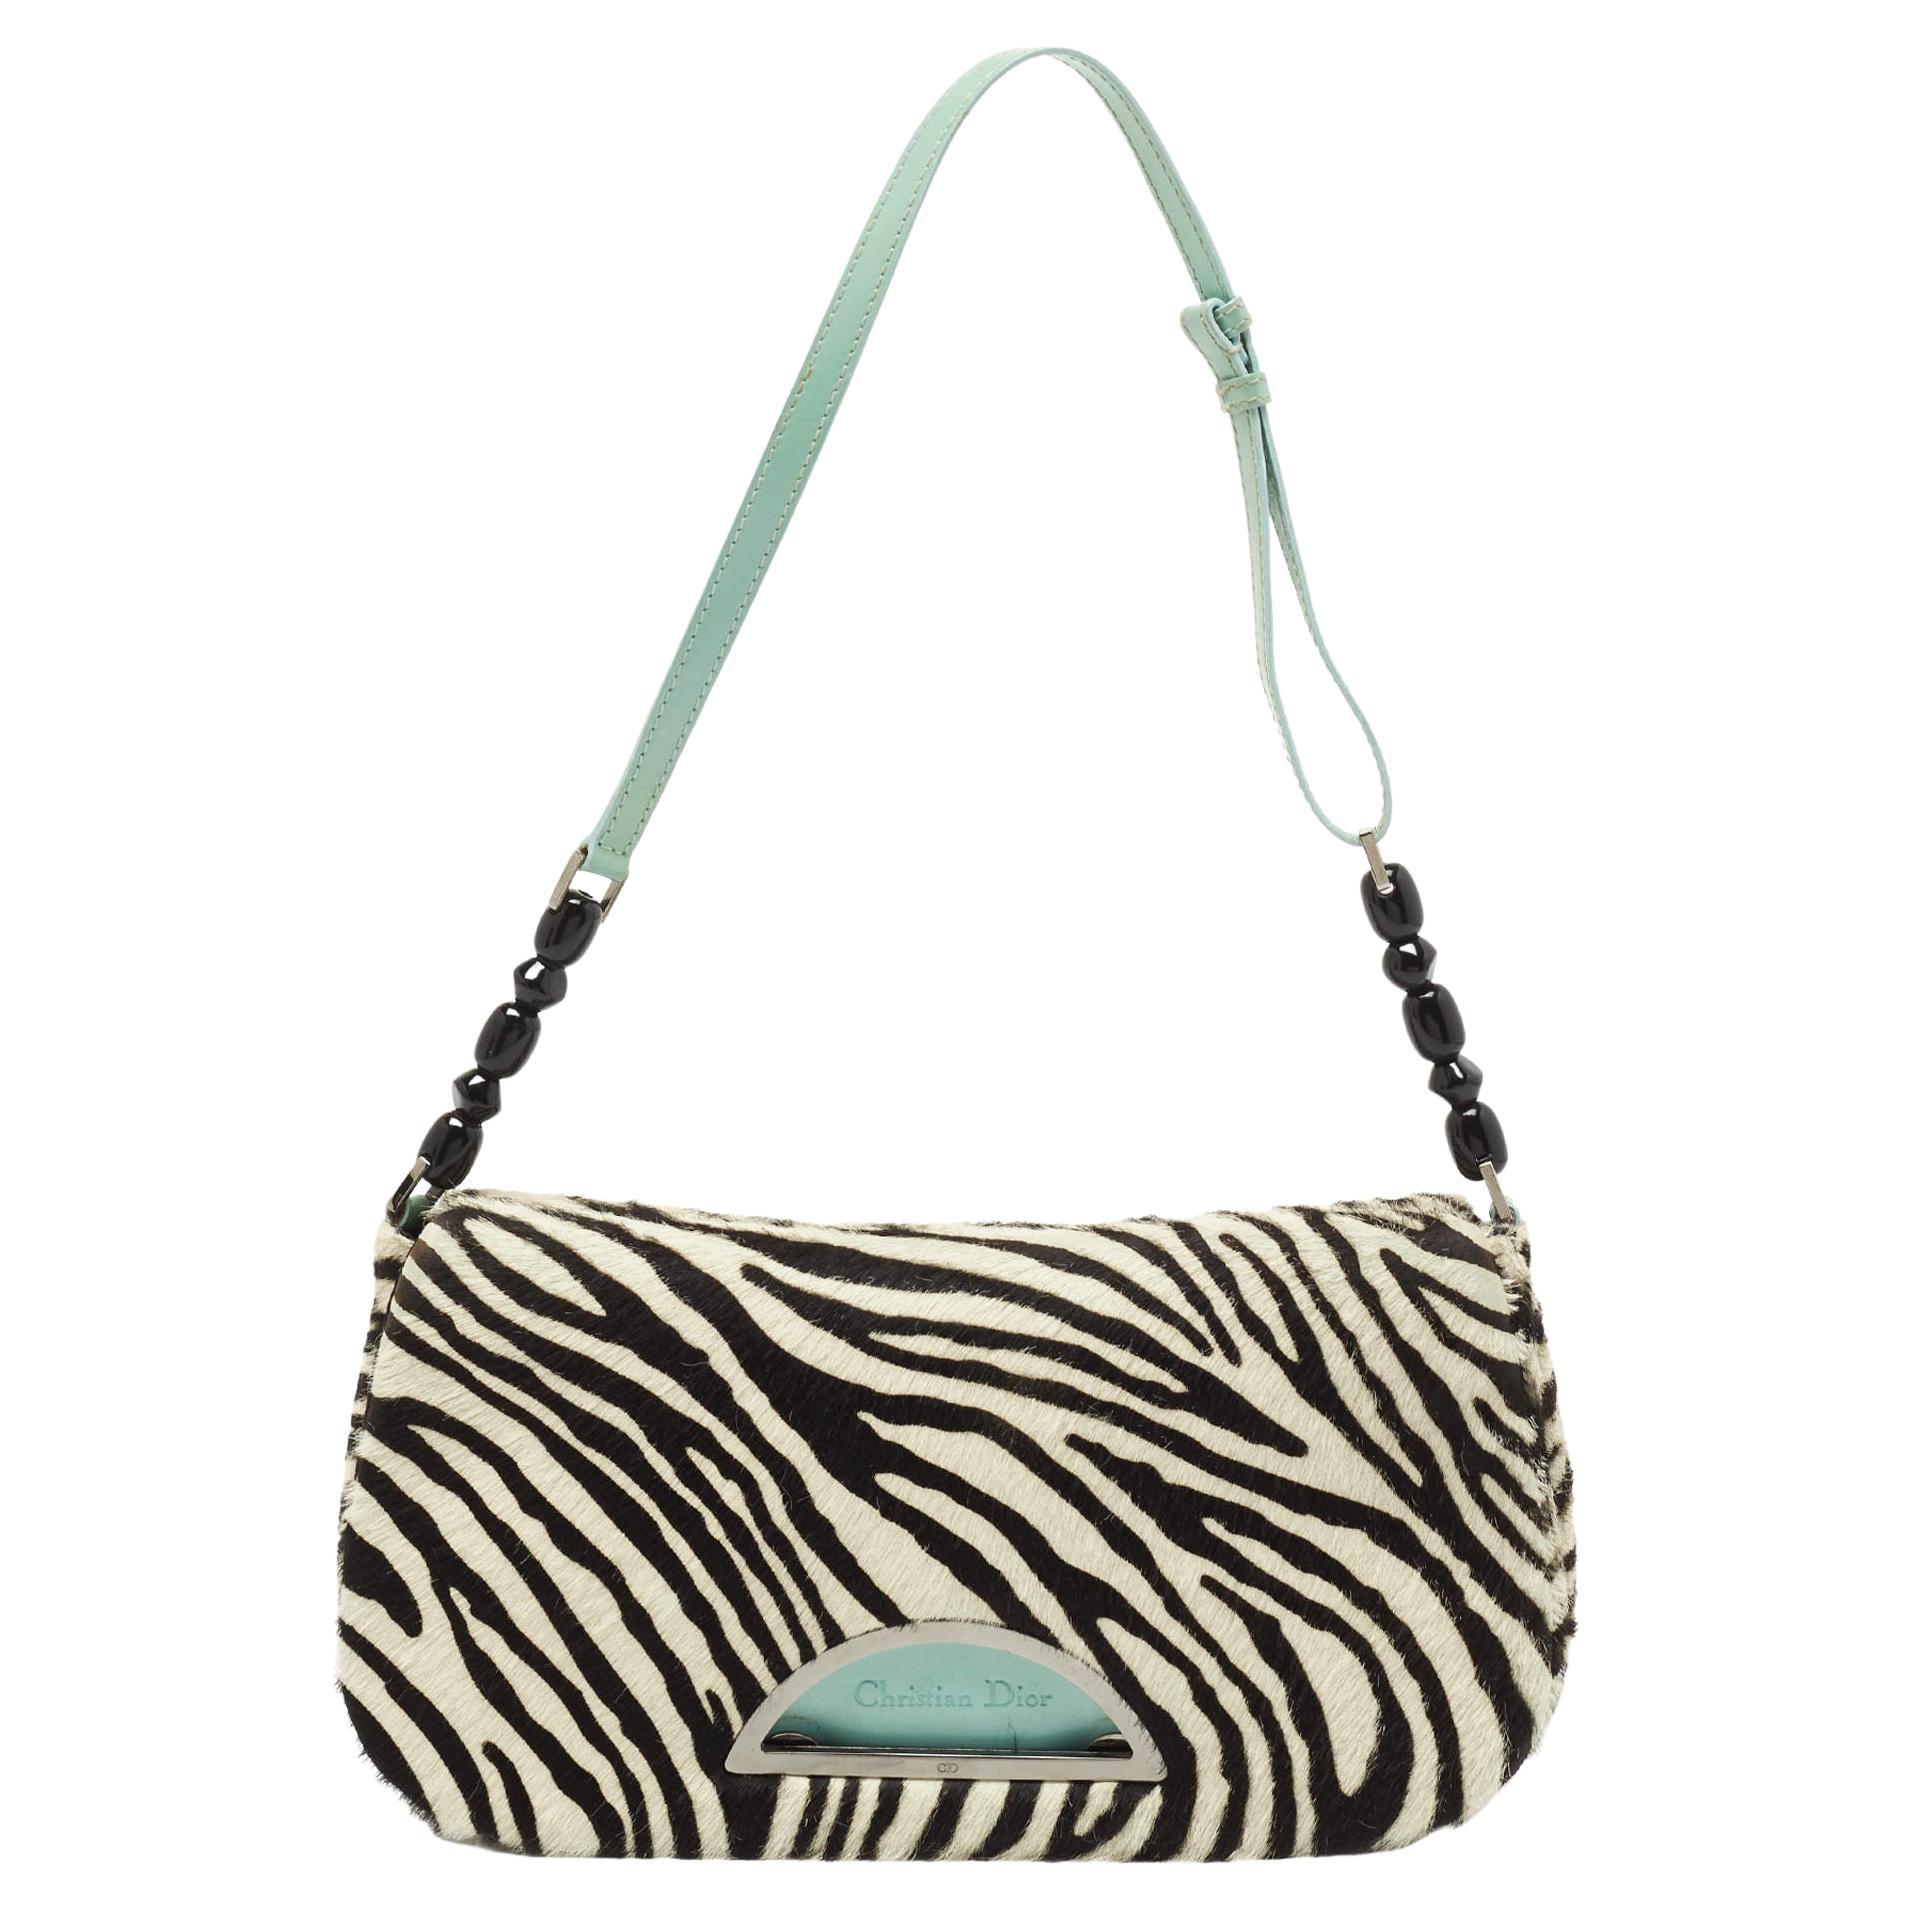 Dior Tricolor Zebra Print Calfhair and Patent Leather Malice Shoulder Bag